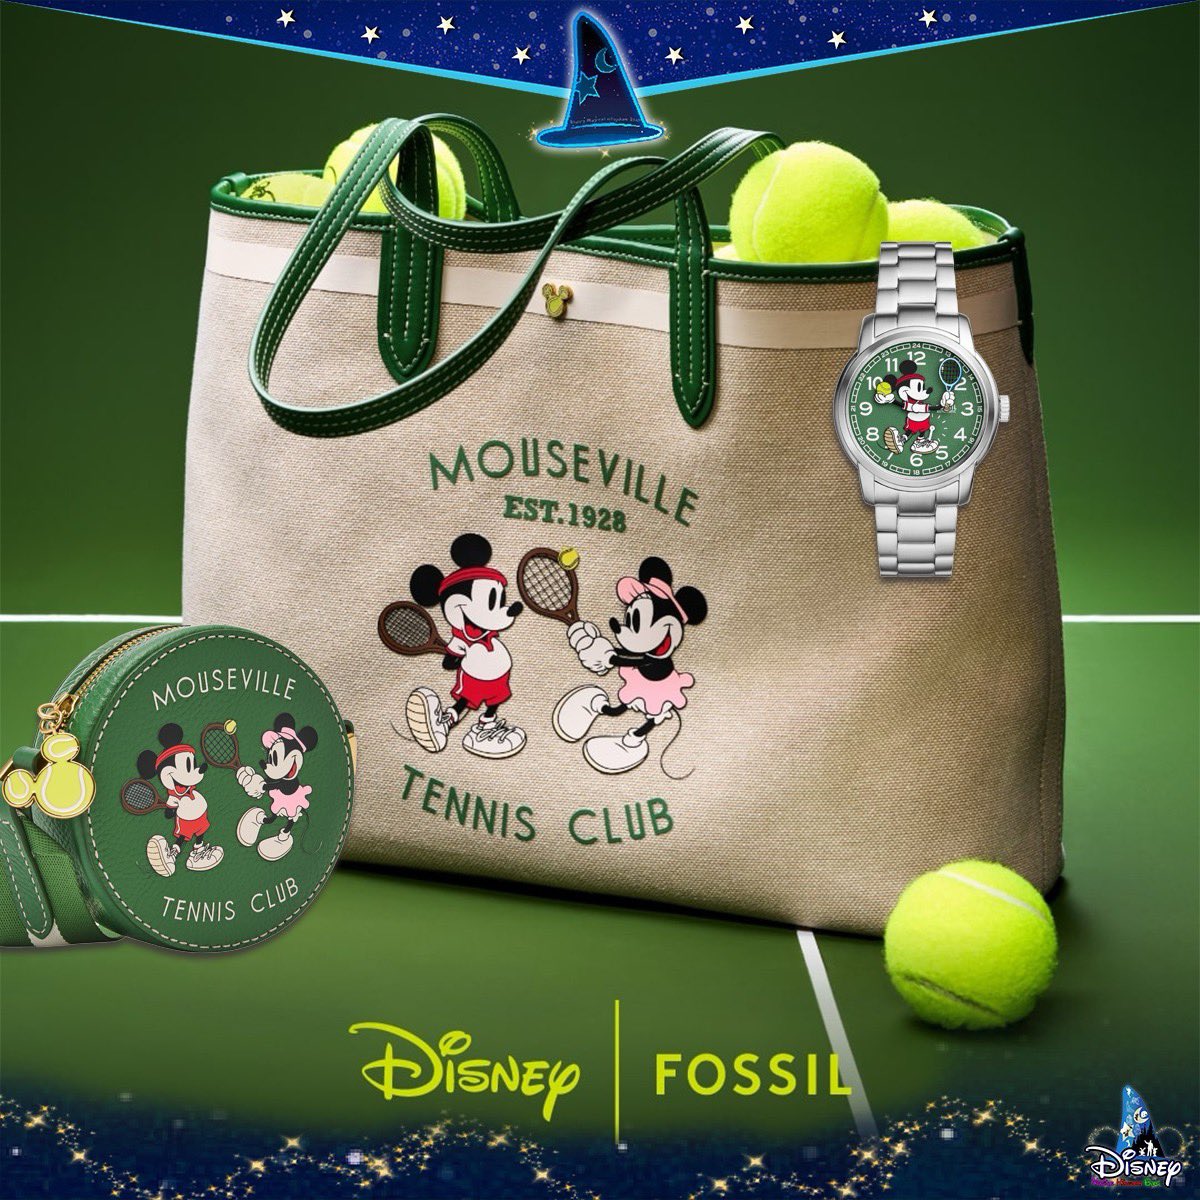 Oh boy! Check out the Magic of the Fossil x Disney Tennis Collection ✨ Magic in details： disney-magical-kingdom-blog.com/2024/05/Fossil… #DisneyFossil #Mickey #MickeyMouse #米奇 #迪士尼 #Disney #Fossil